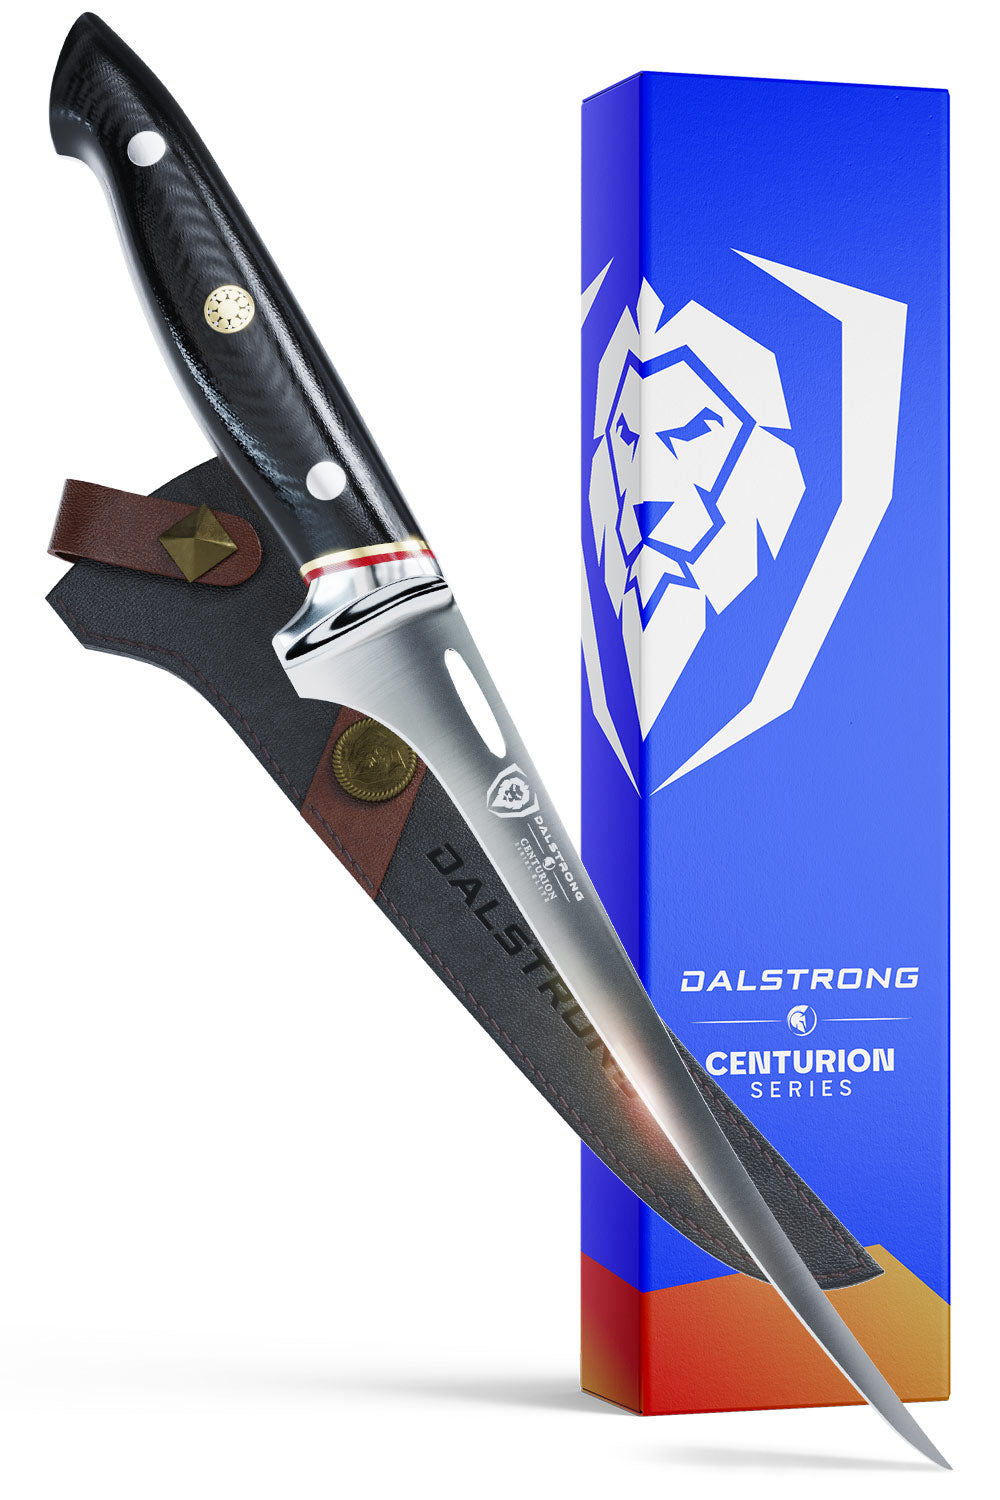 Dalstrong centurion series 7 inch fillet knife with black handle in front of it's premium packaging.